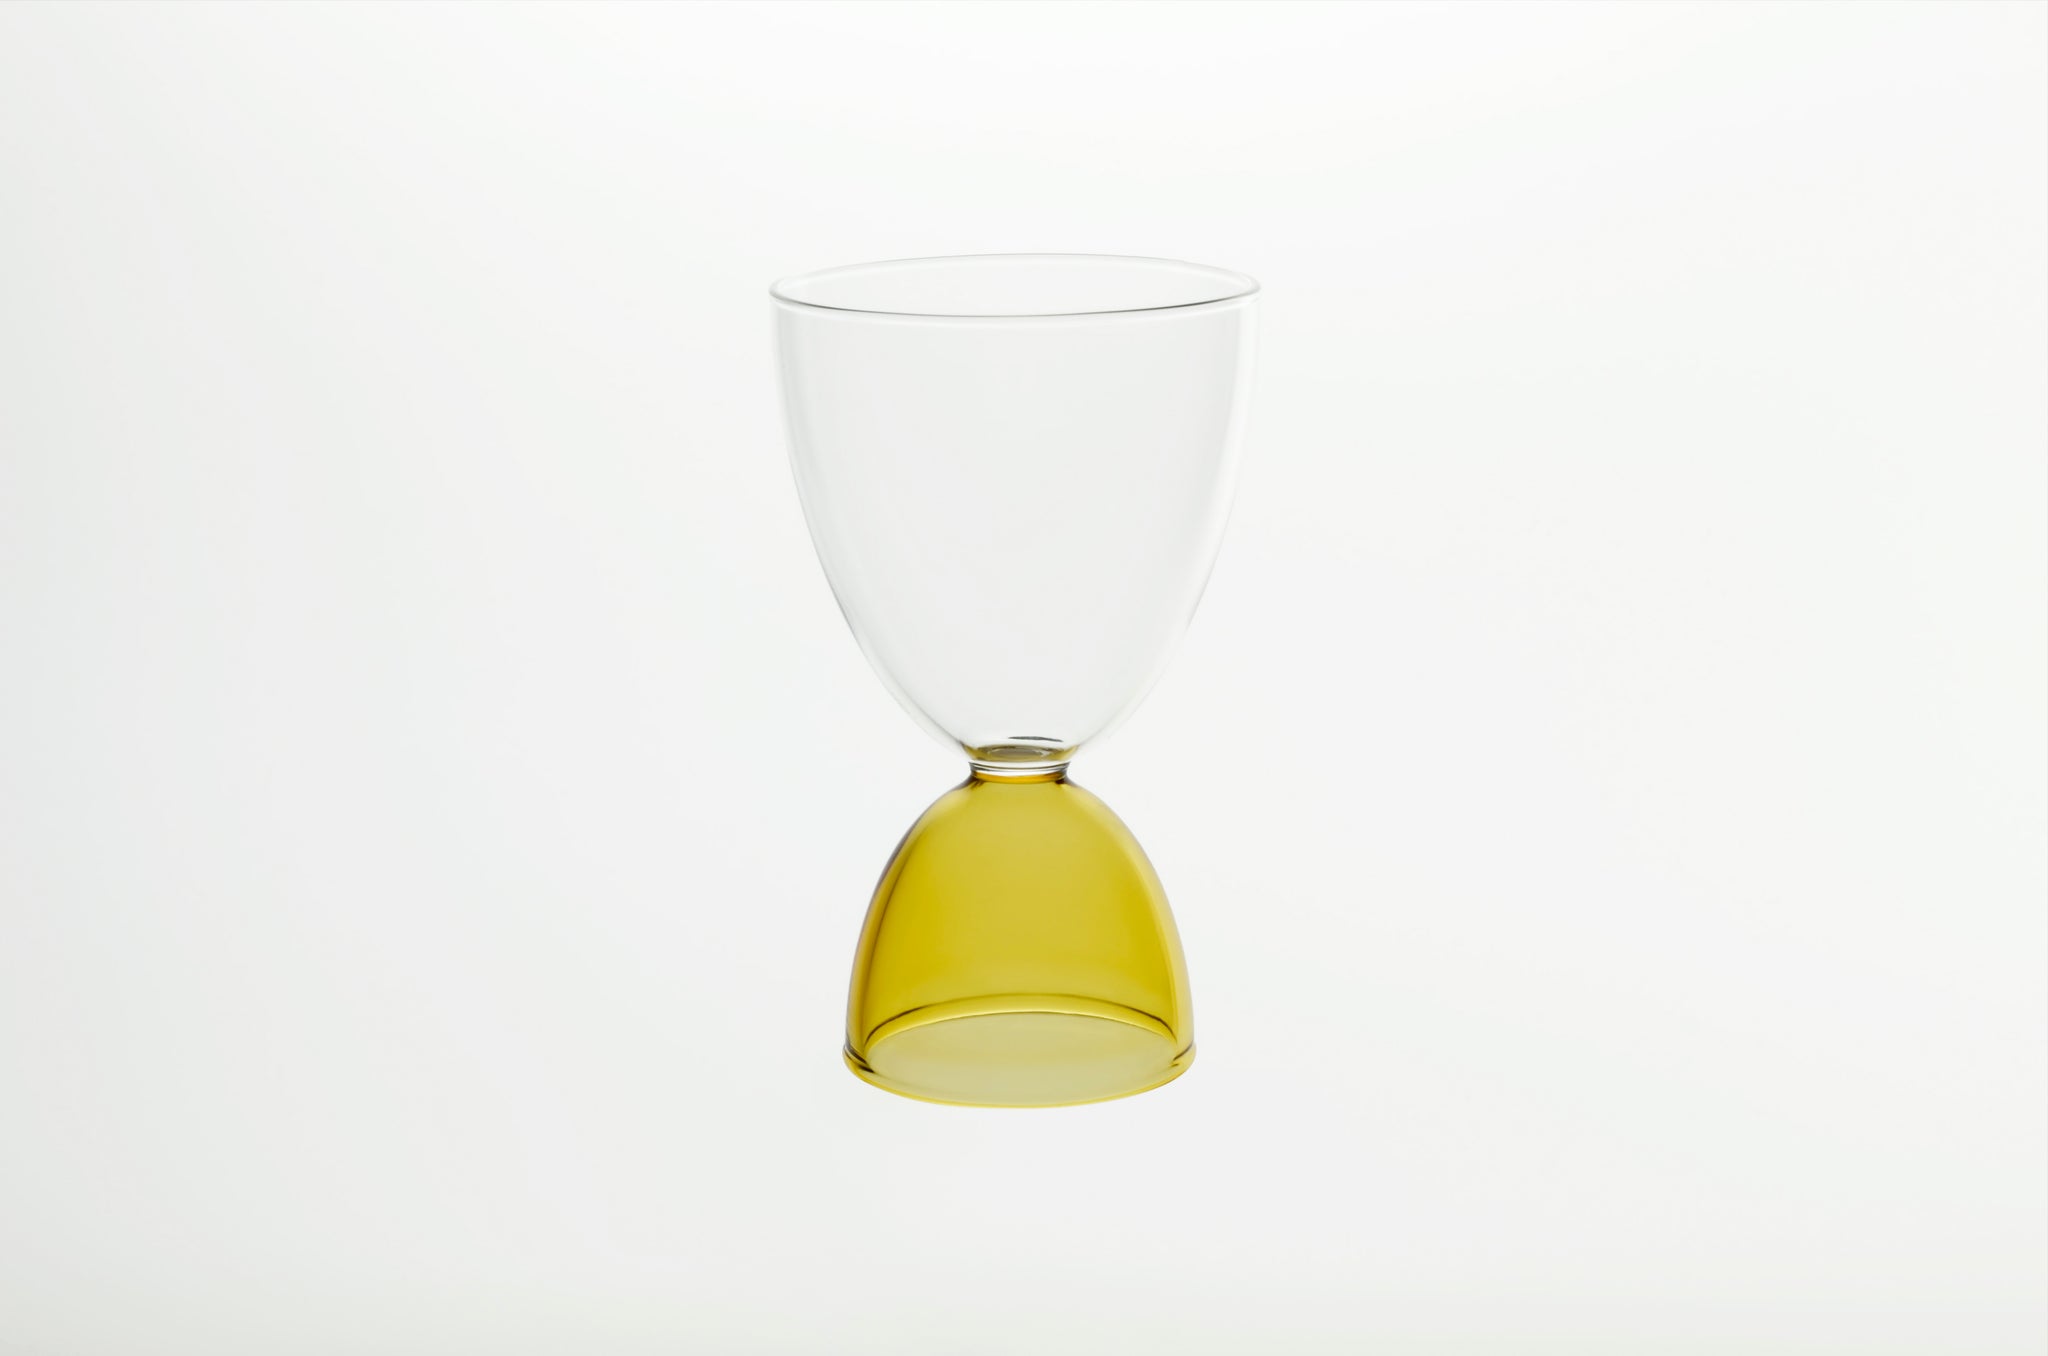 elysian collective hourglass honey color cocktail glass by mamo